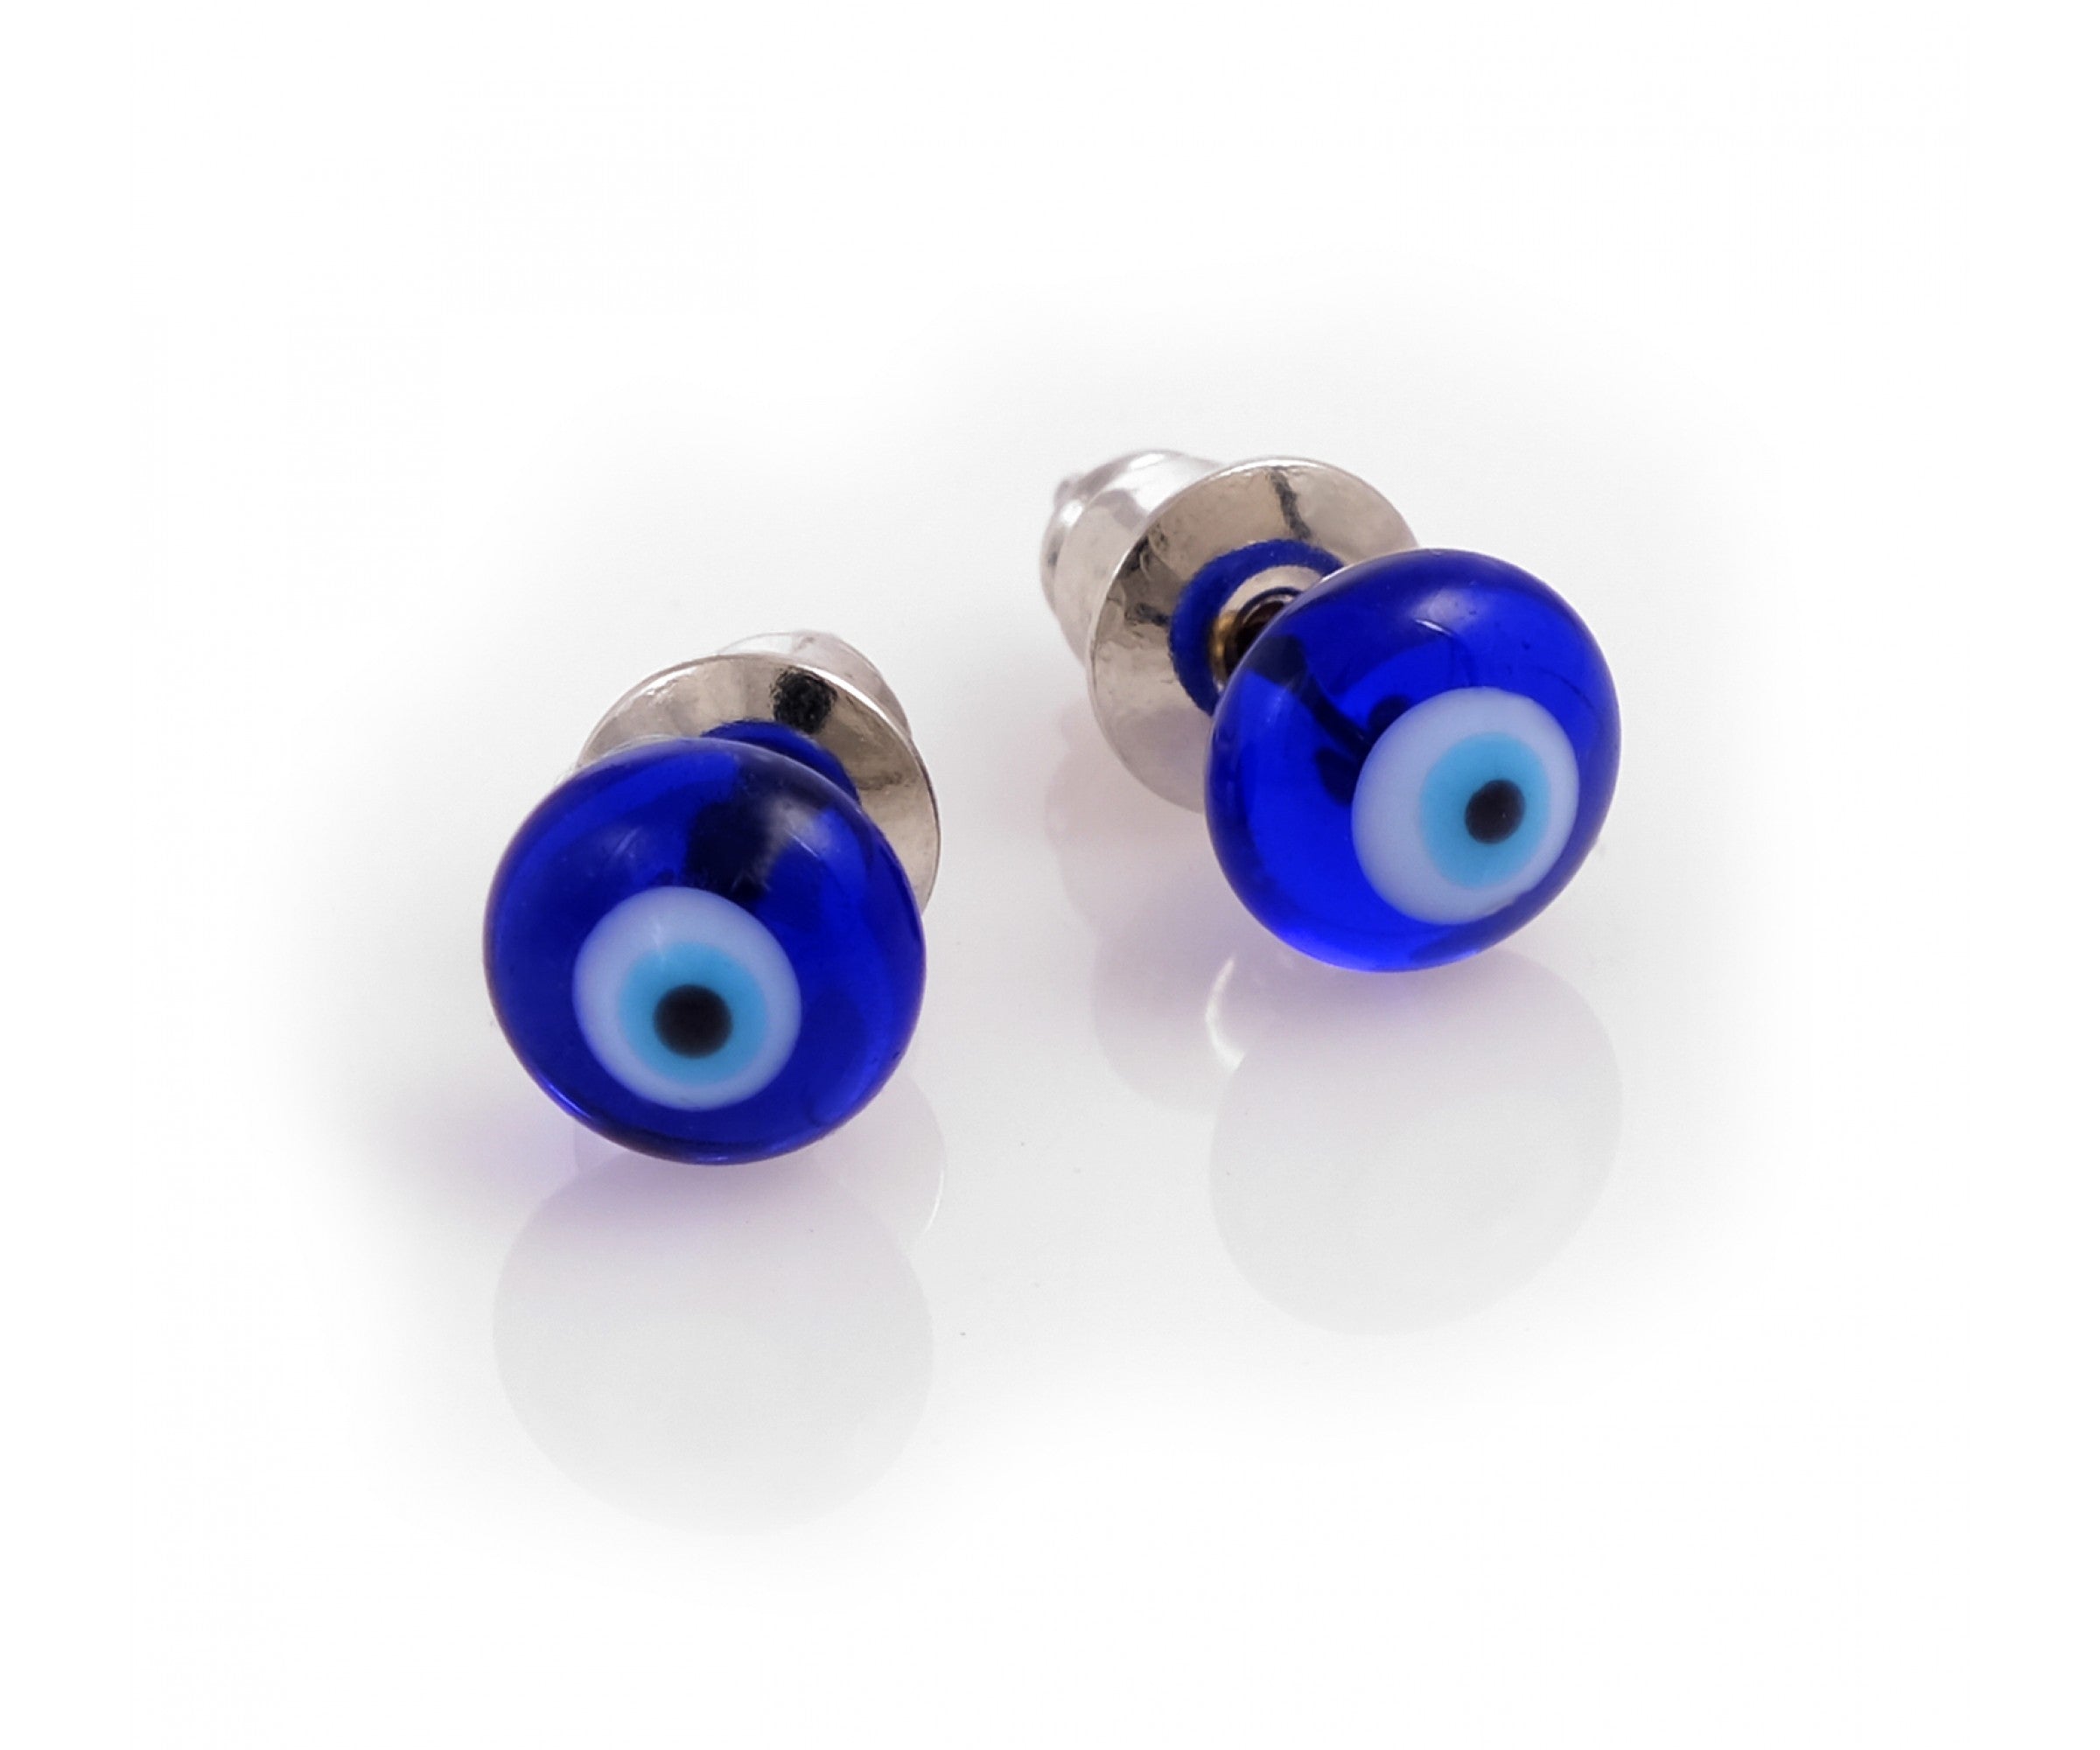 Glass Evil Eye Earrings | Protective Jewish Amulets